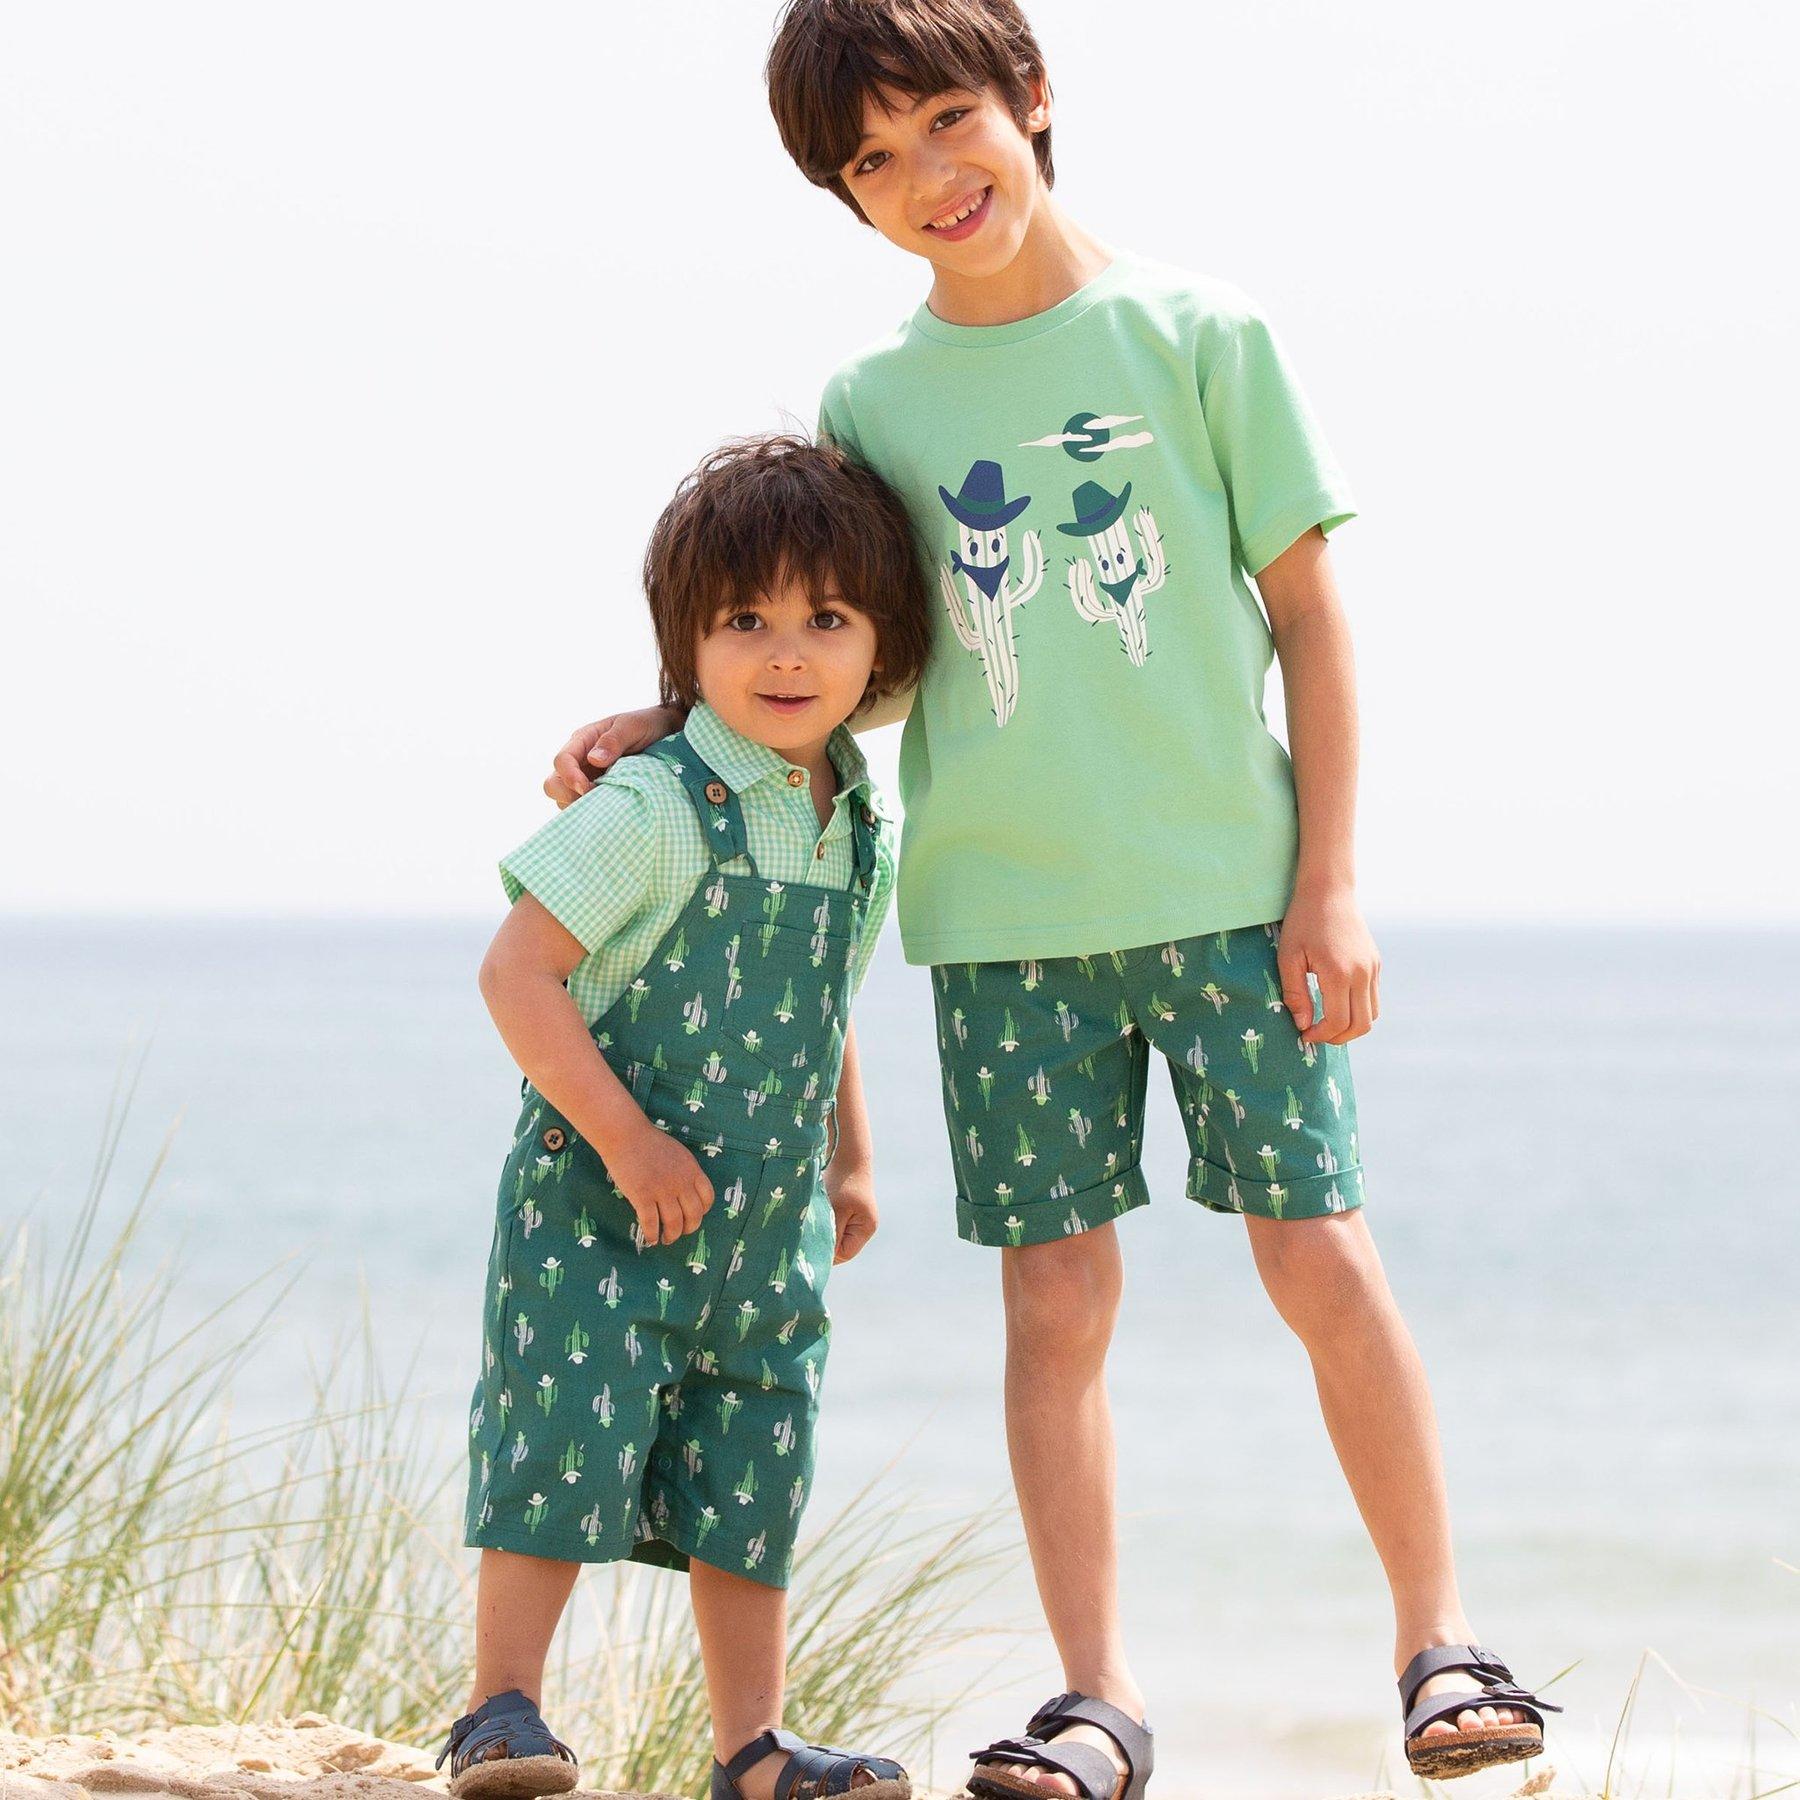 Boy wearing Kite Clothing Cowboy Cactus T-Shirt with friend